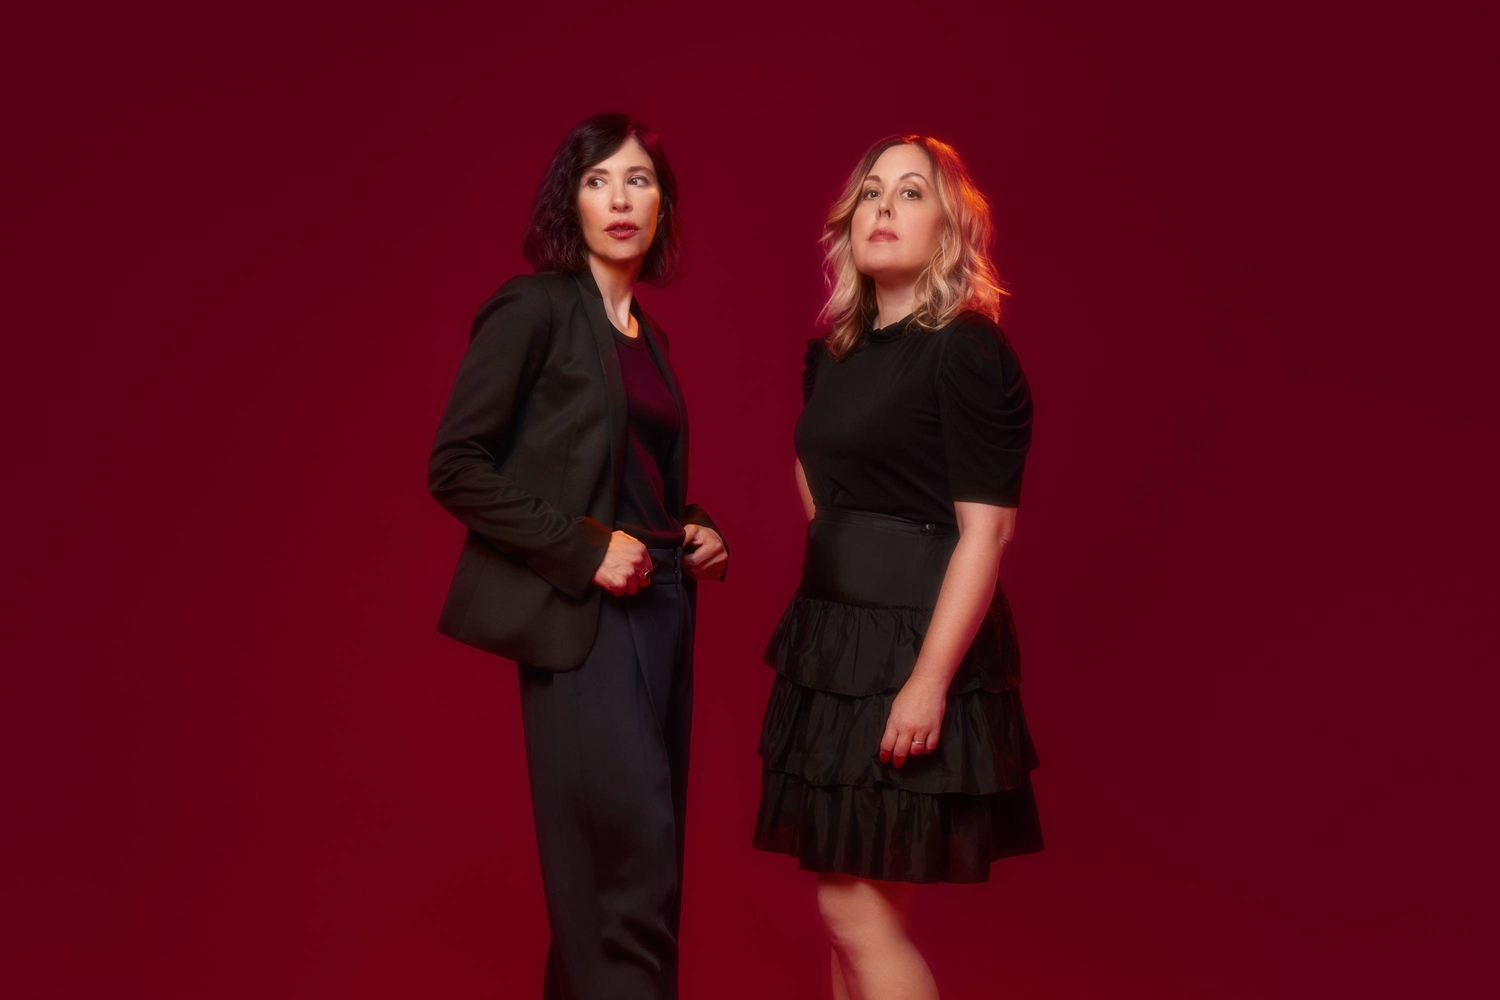 Sleater-Kinney preview new album with ‘Untidy Creature’